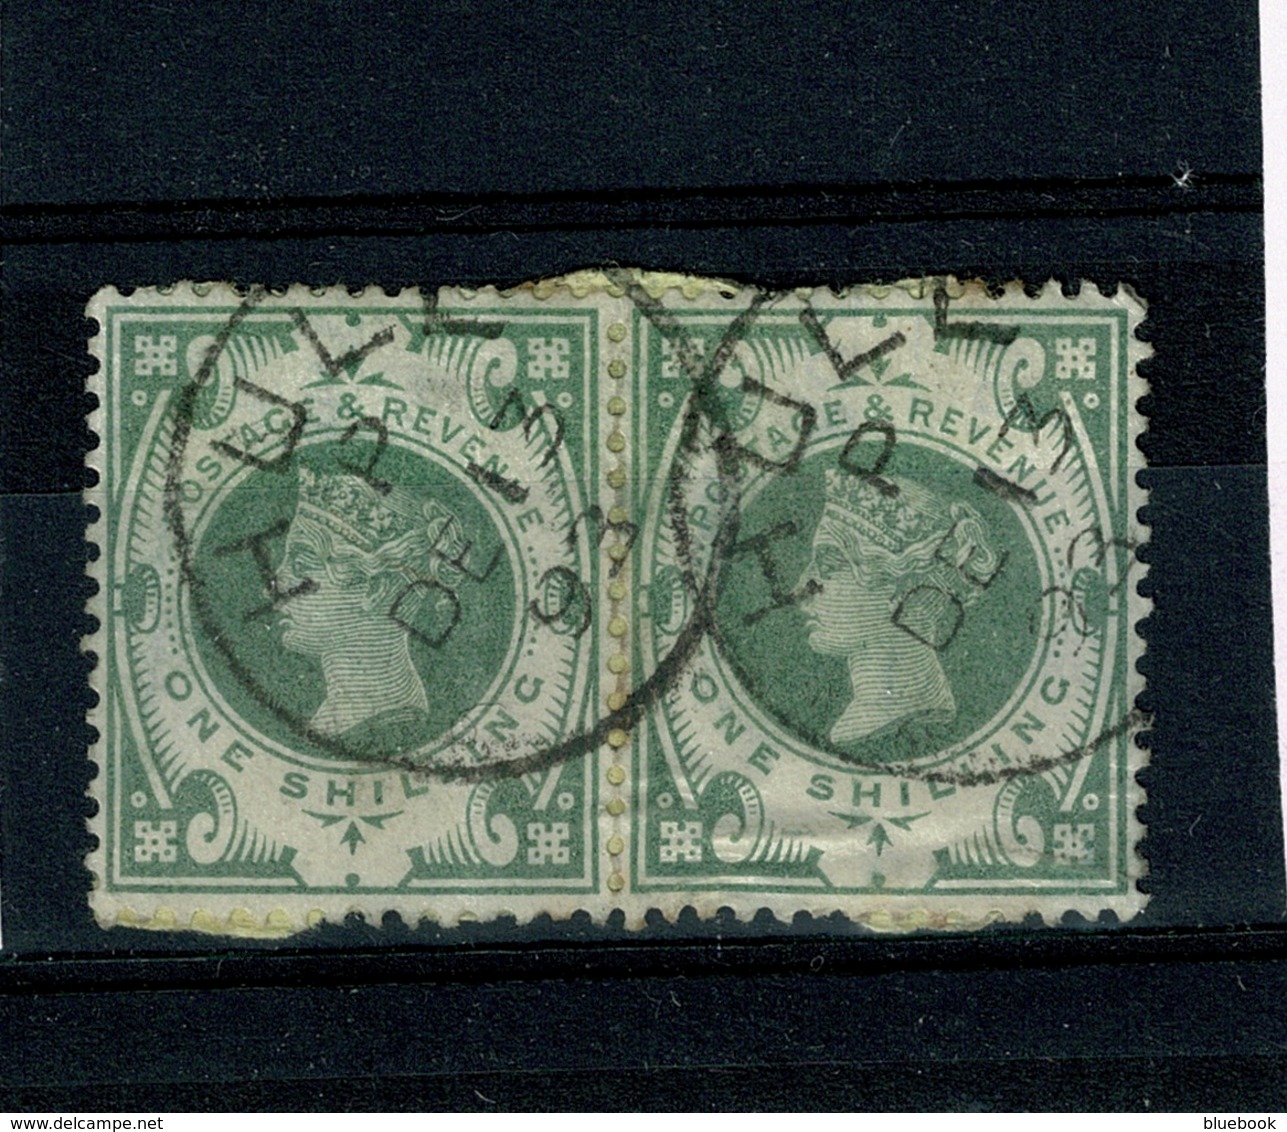 Ref 1333 - Queen Victoria 1/= Green SG 211 - 2 Stamps On Paper Hull Cancel - Cat £150+ - Gebraucht